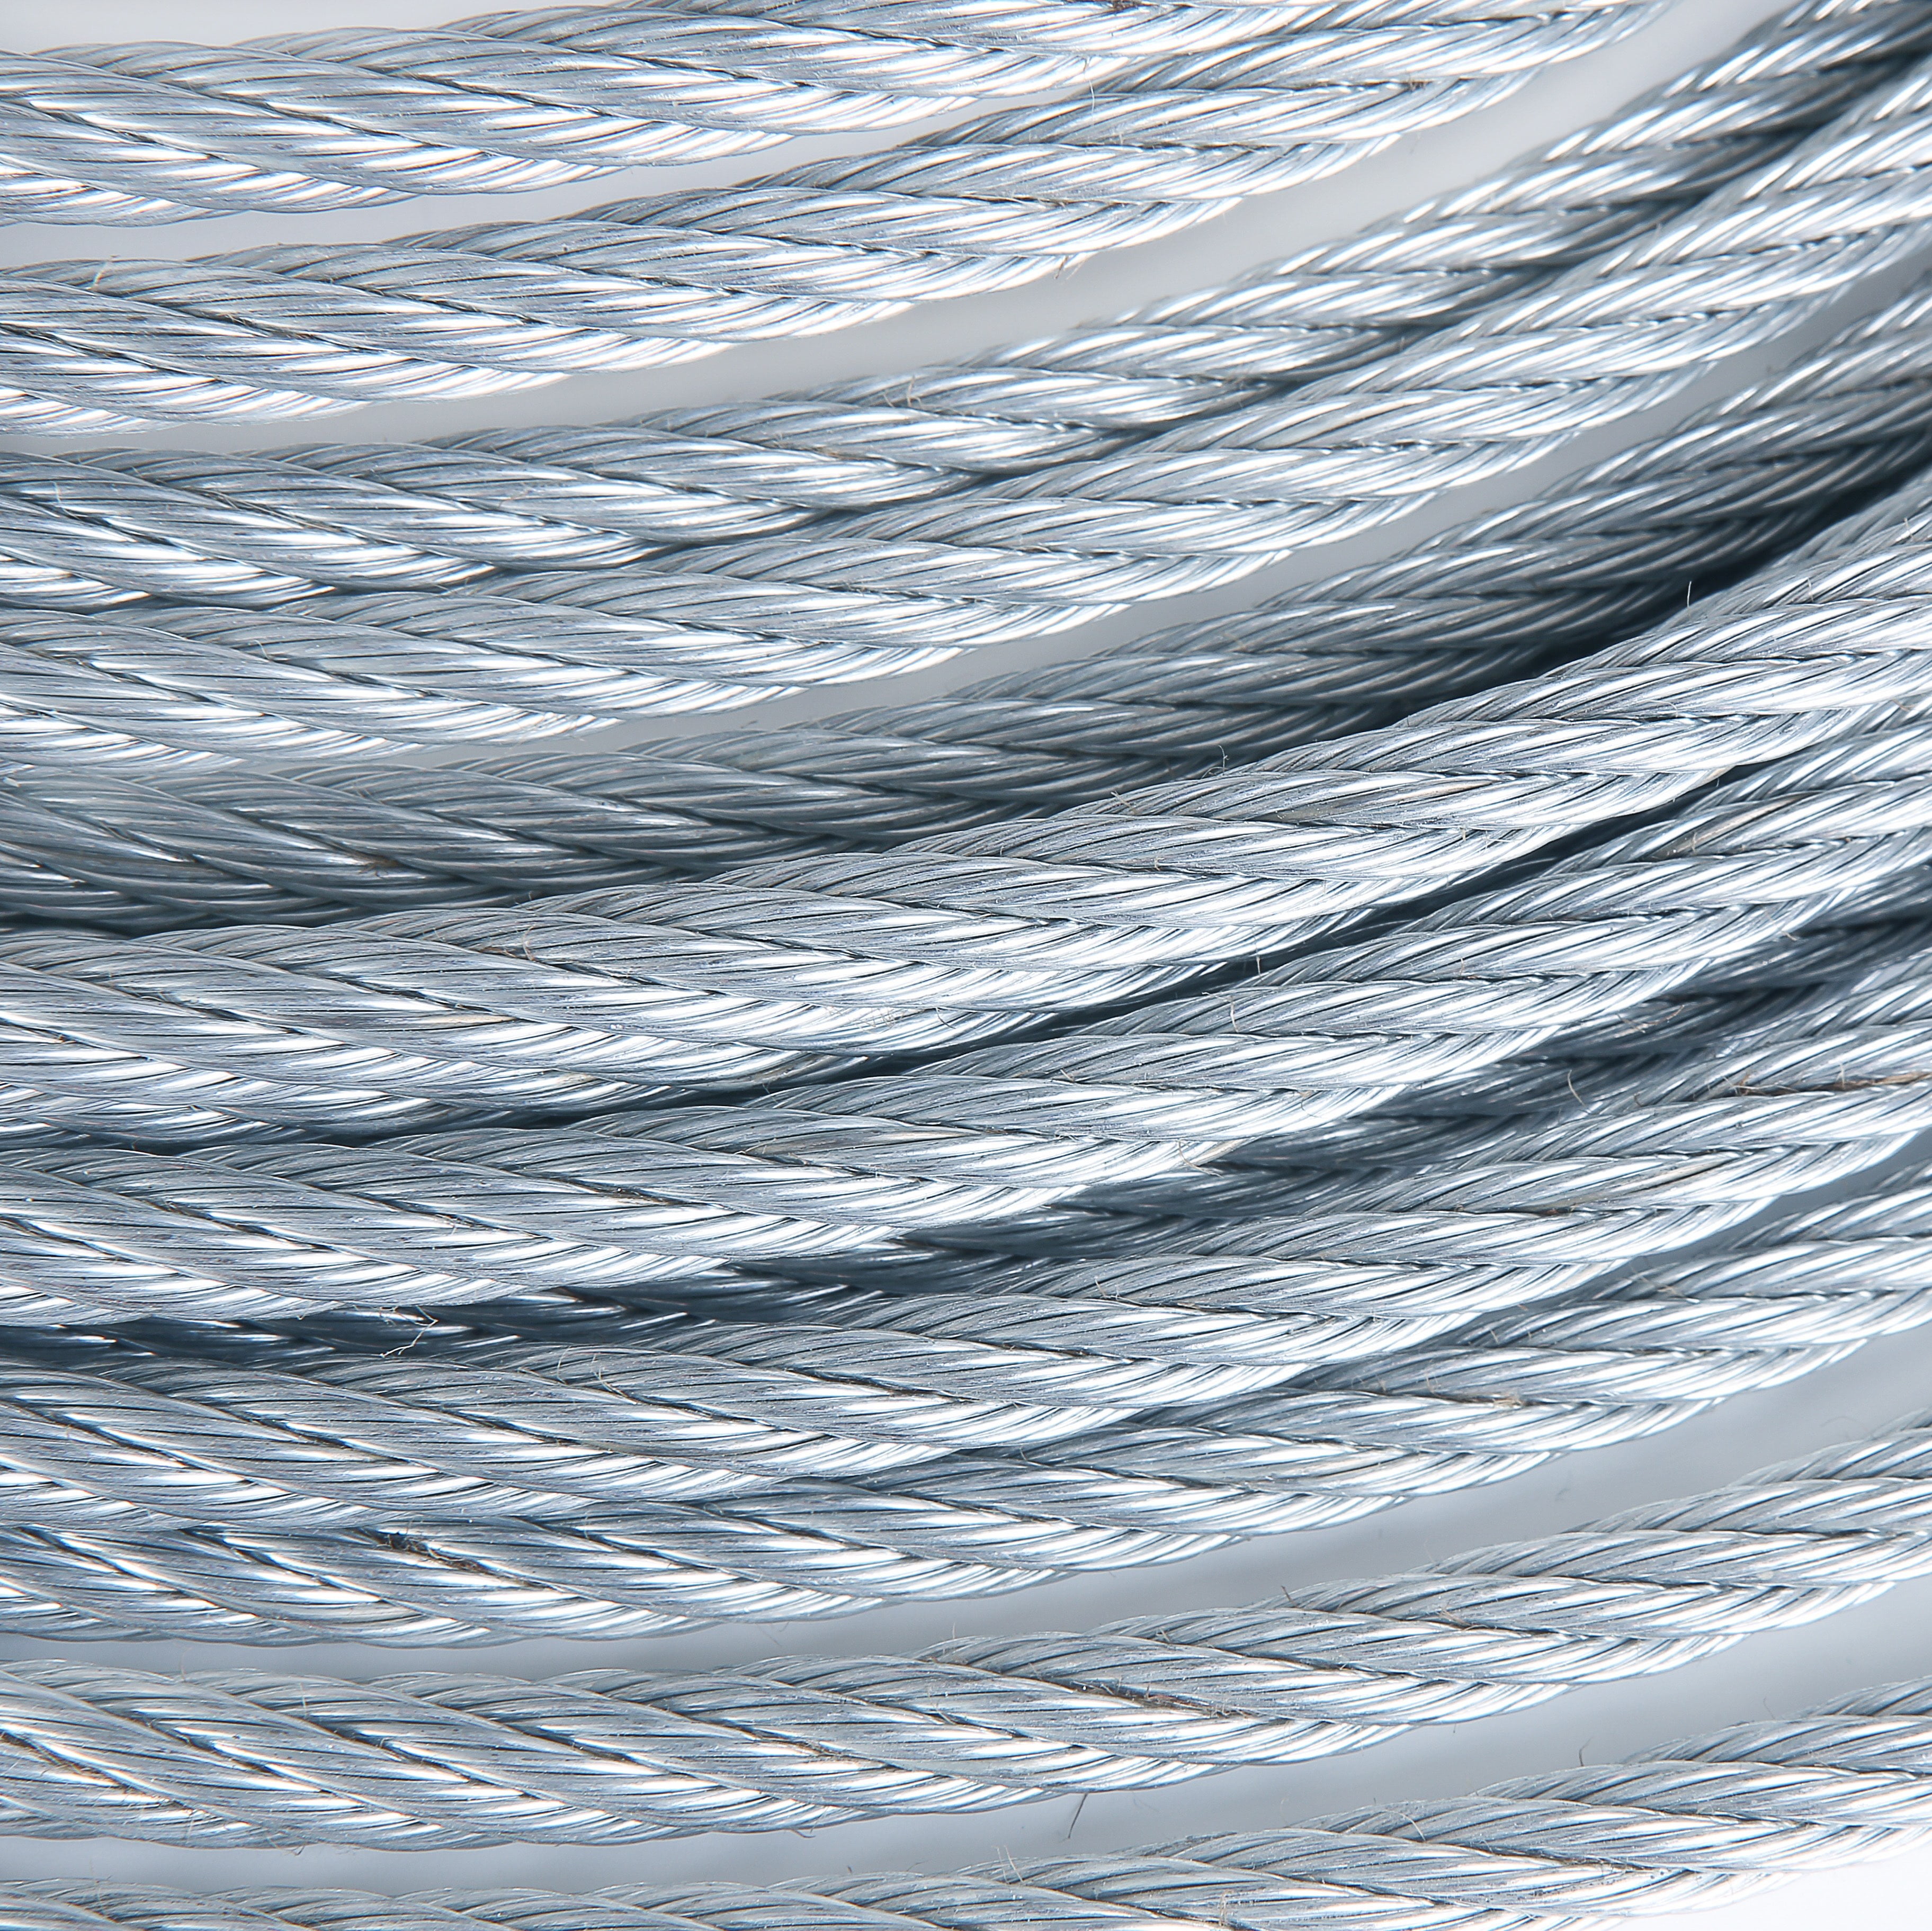 7 x 19 Galvanized Aircraft Cable Wire Rope 3/16 500 ft with Aluminum Sleeves 20 PCS 3/16 Aluminum Sleeves 